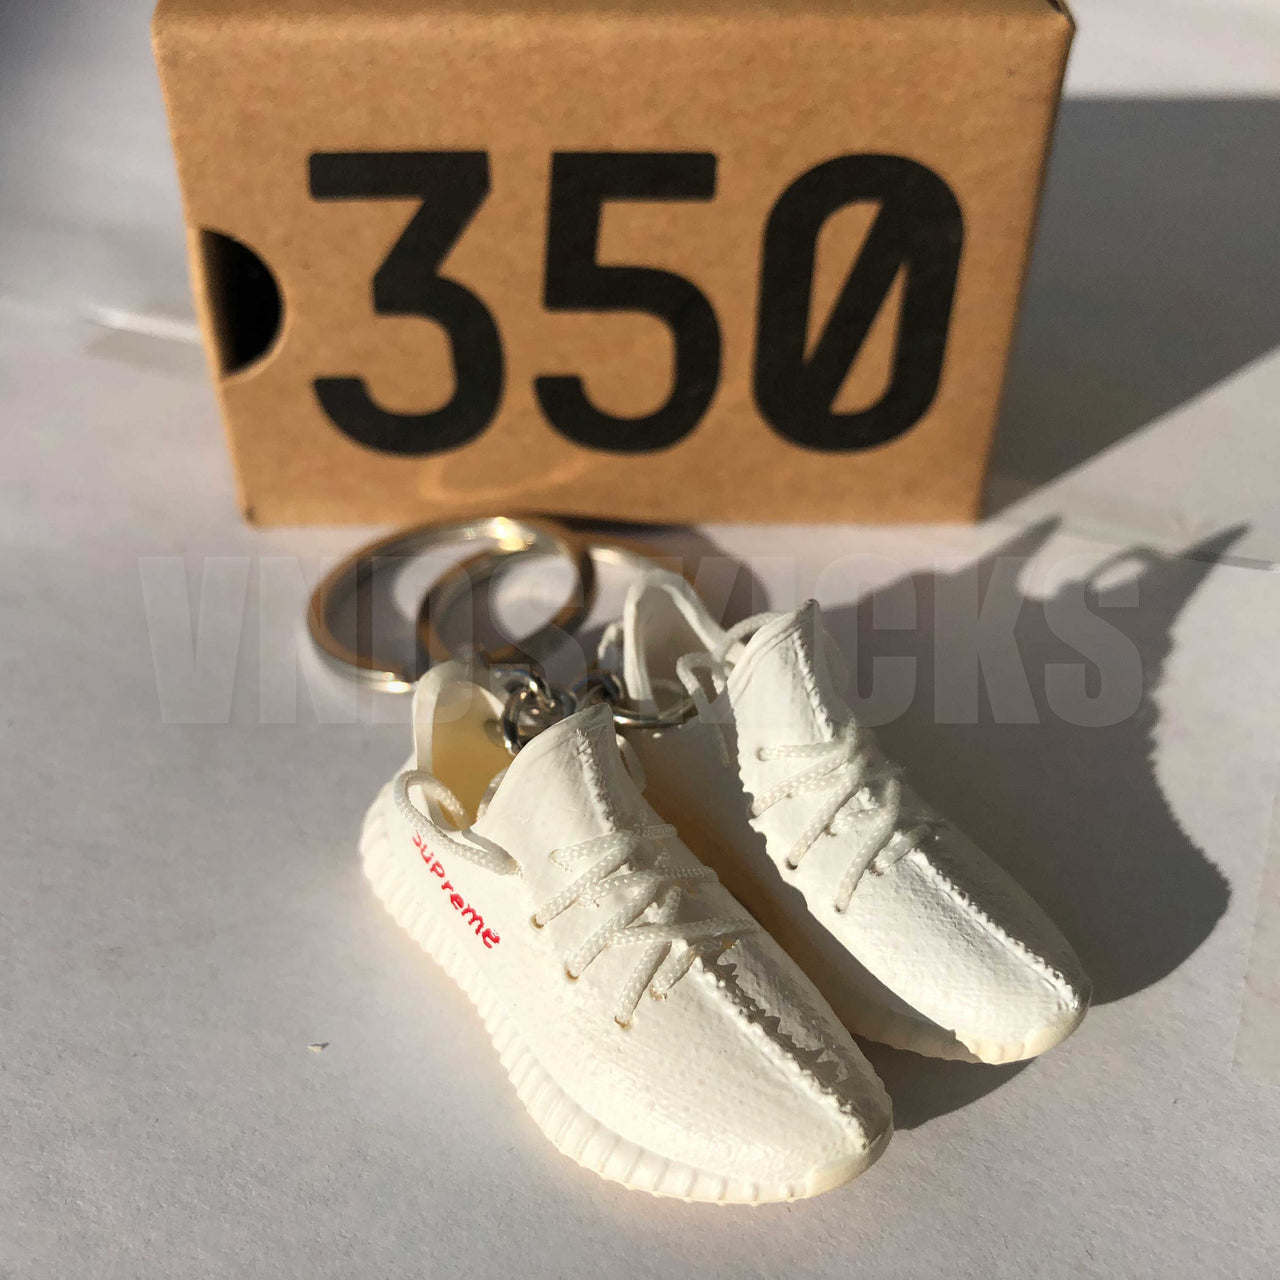 Yeezy 350 Boost "Supreme" - Sneakers 3D Keychain